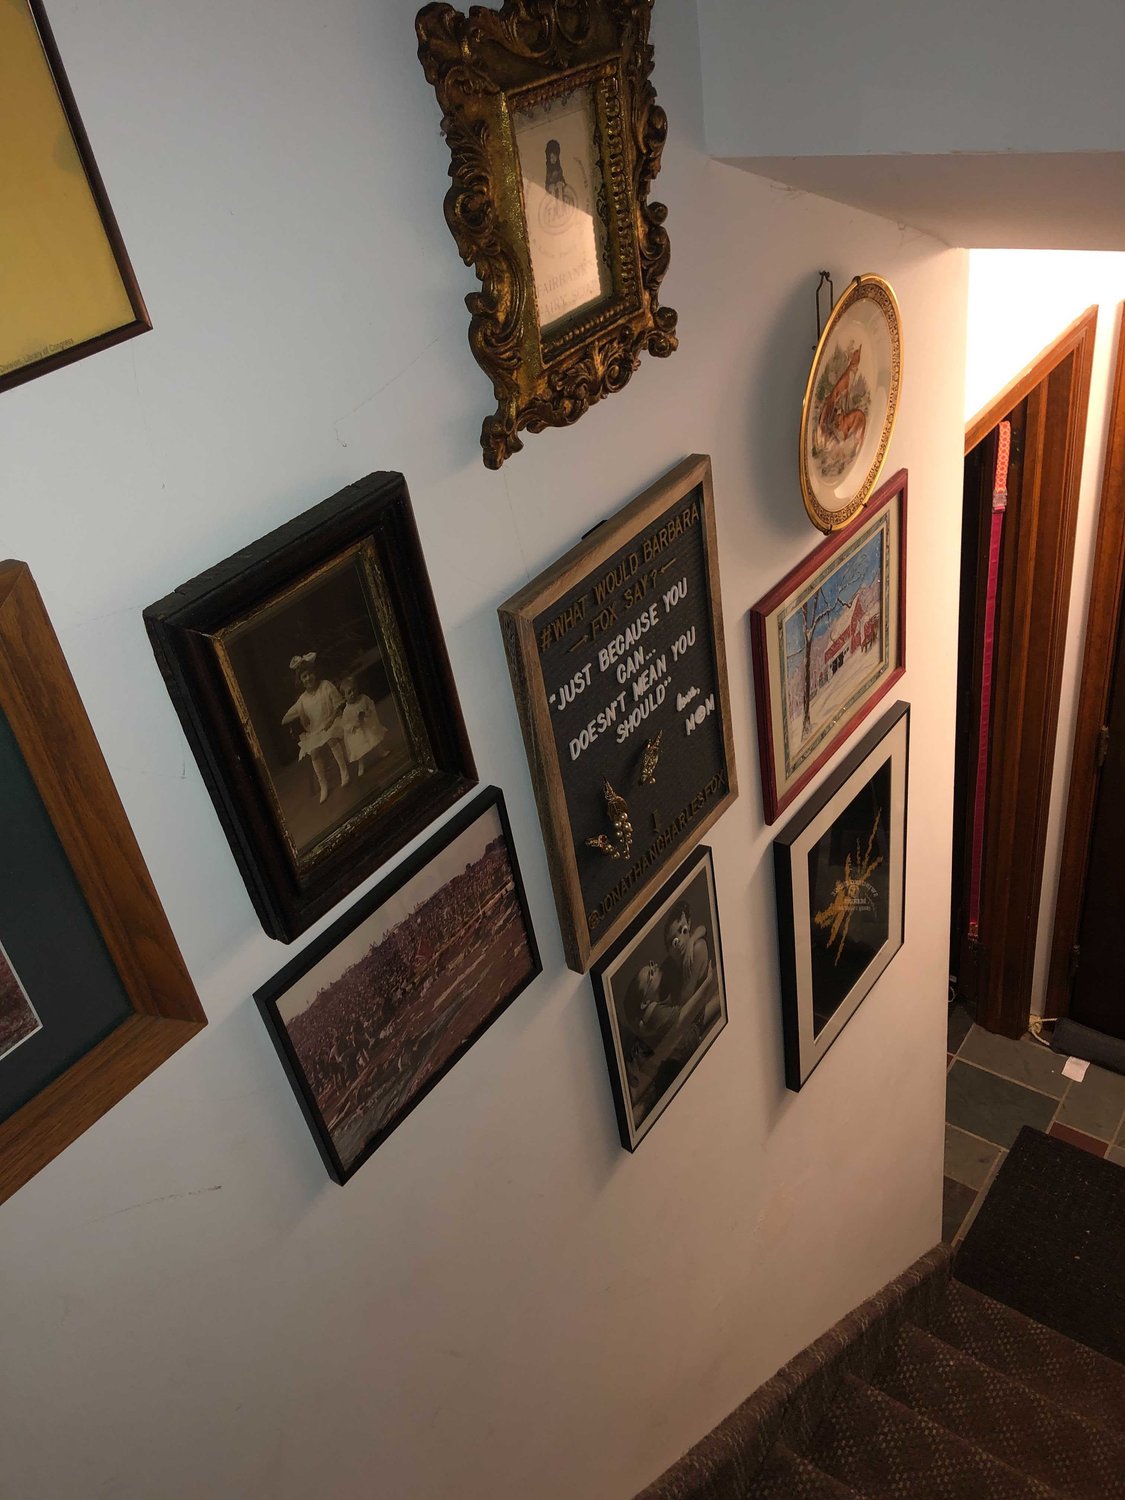 I'm not checking to see if these things spark joy, but I am looking at framed work and assessing its value to me. Now my stairwell is loaded with framed odds-and-ends, but they all have meaning for me.